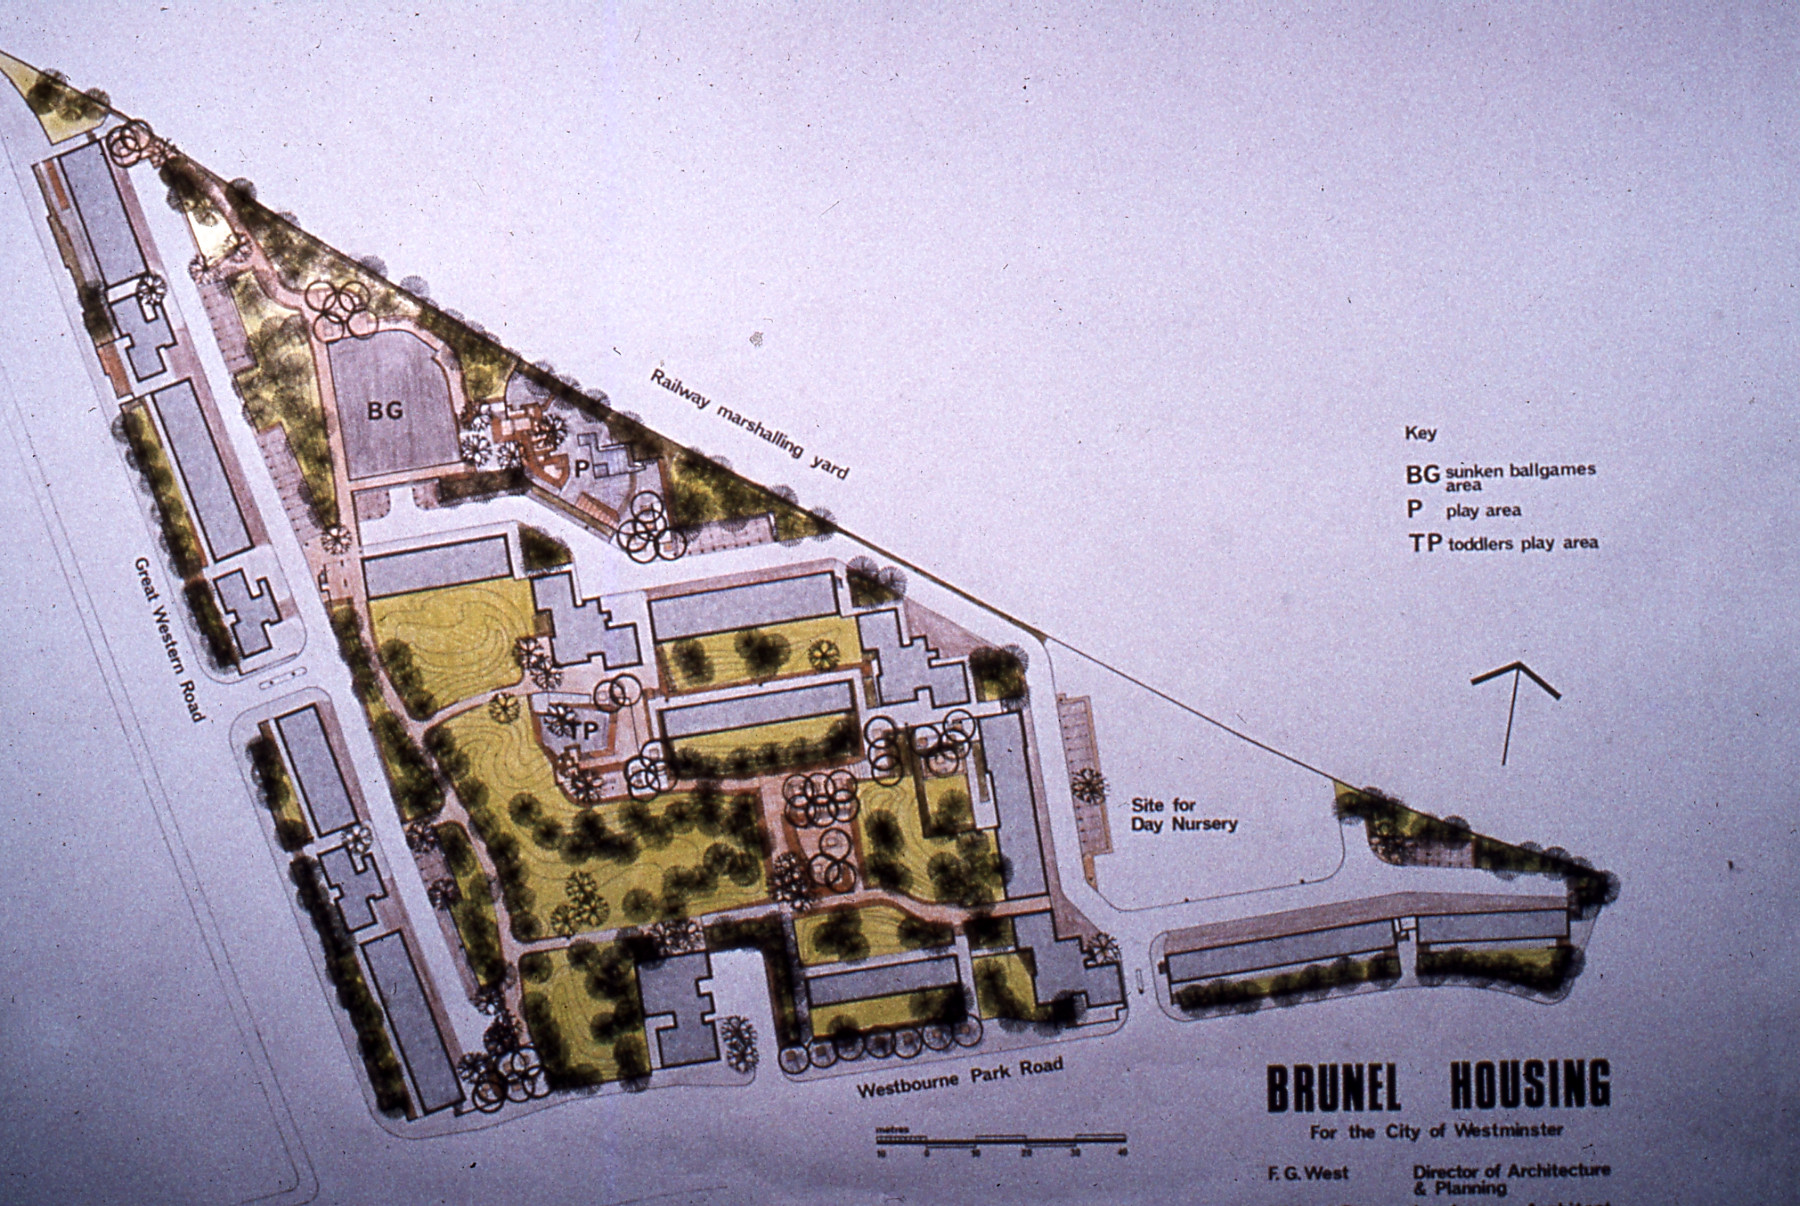 Plan drawing of the Brunel Estate showing location of trees and buildings